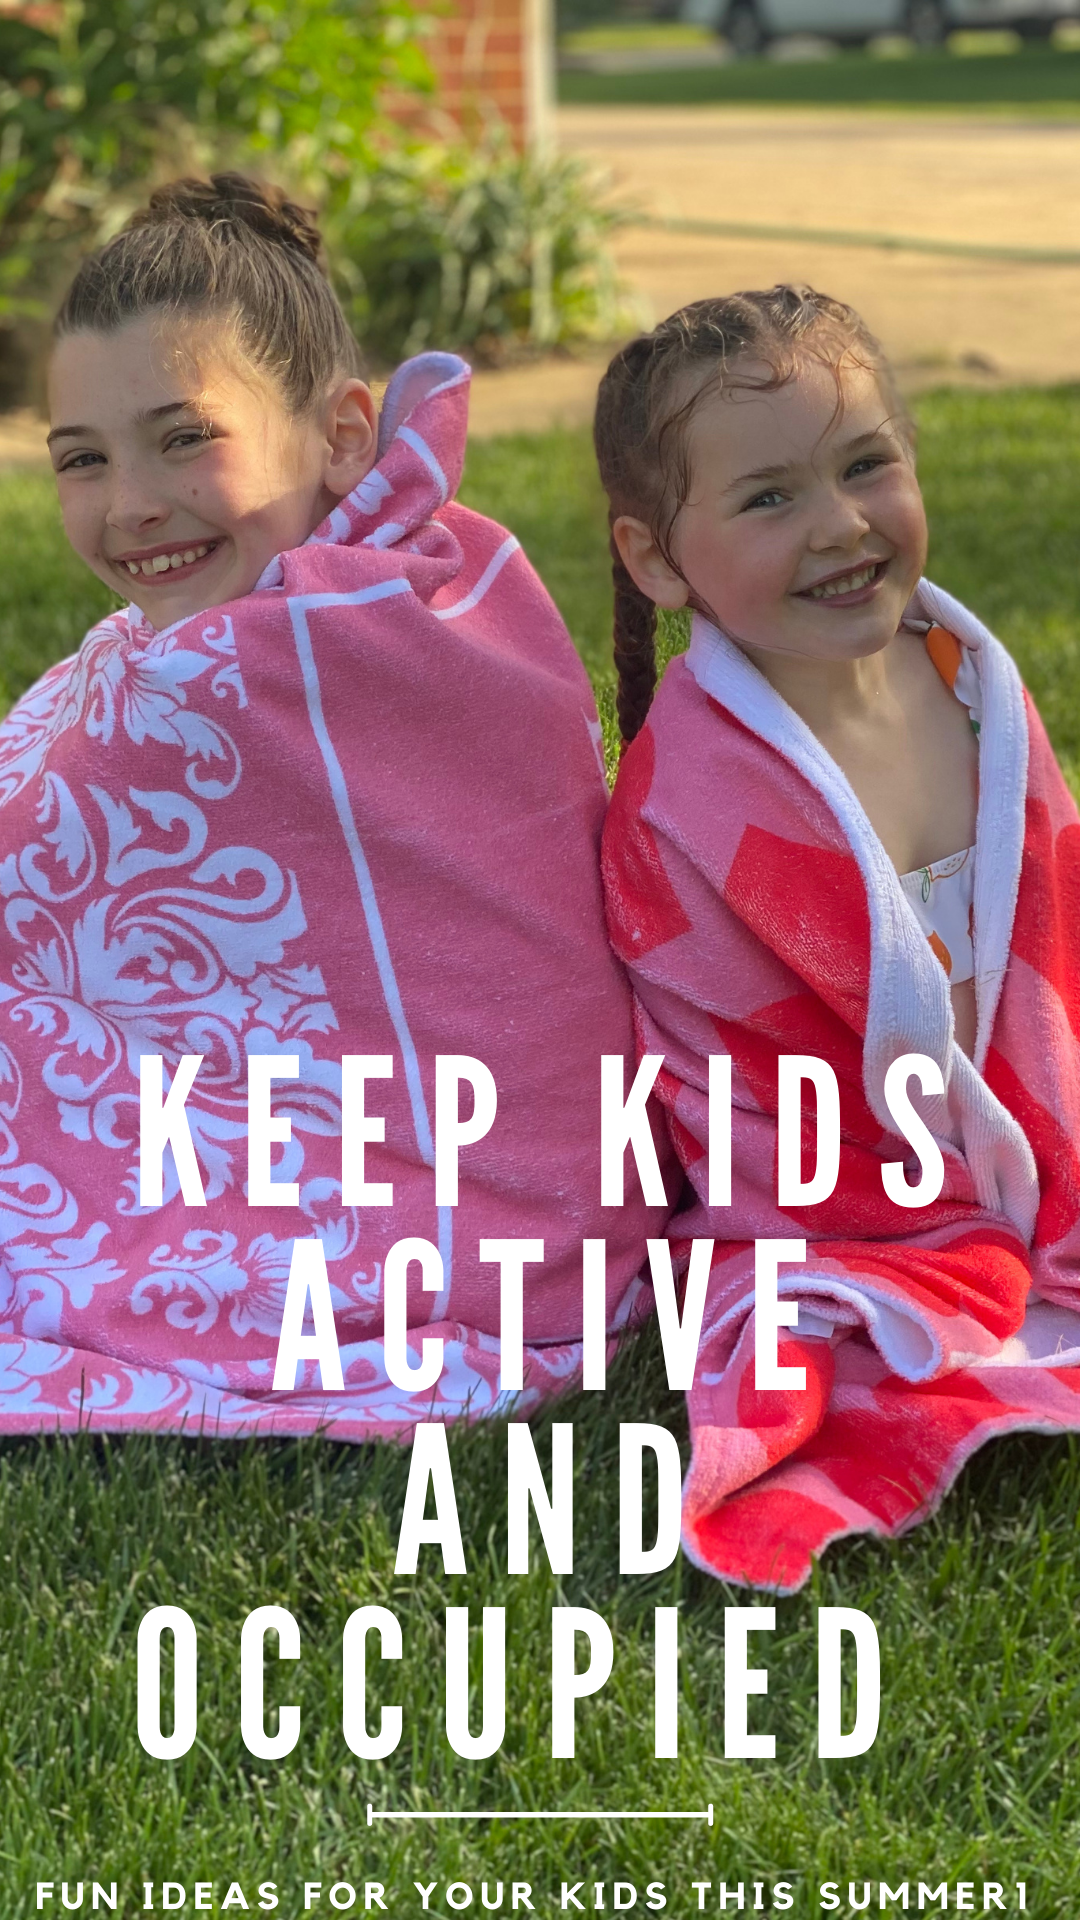 Fun Ways to Keep Kids Active and Occupied 